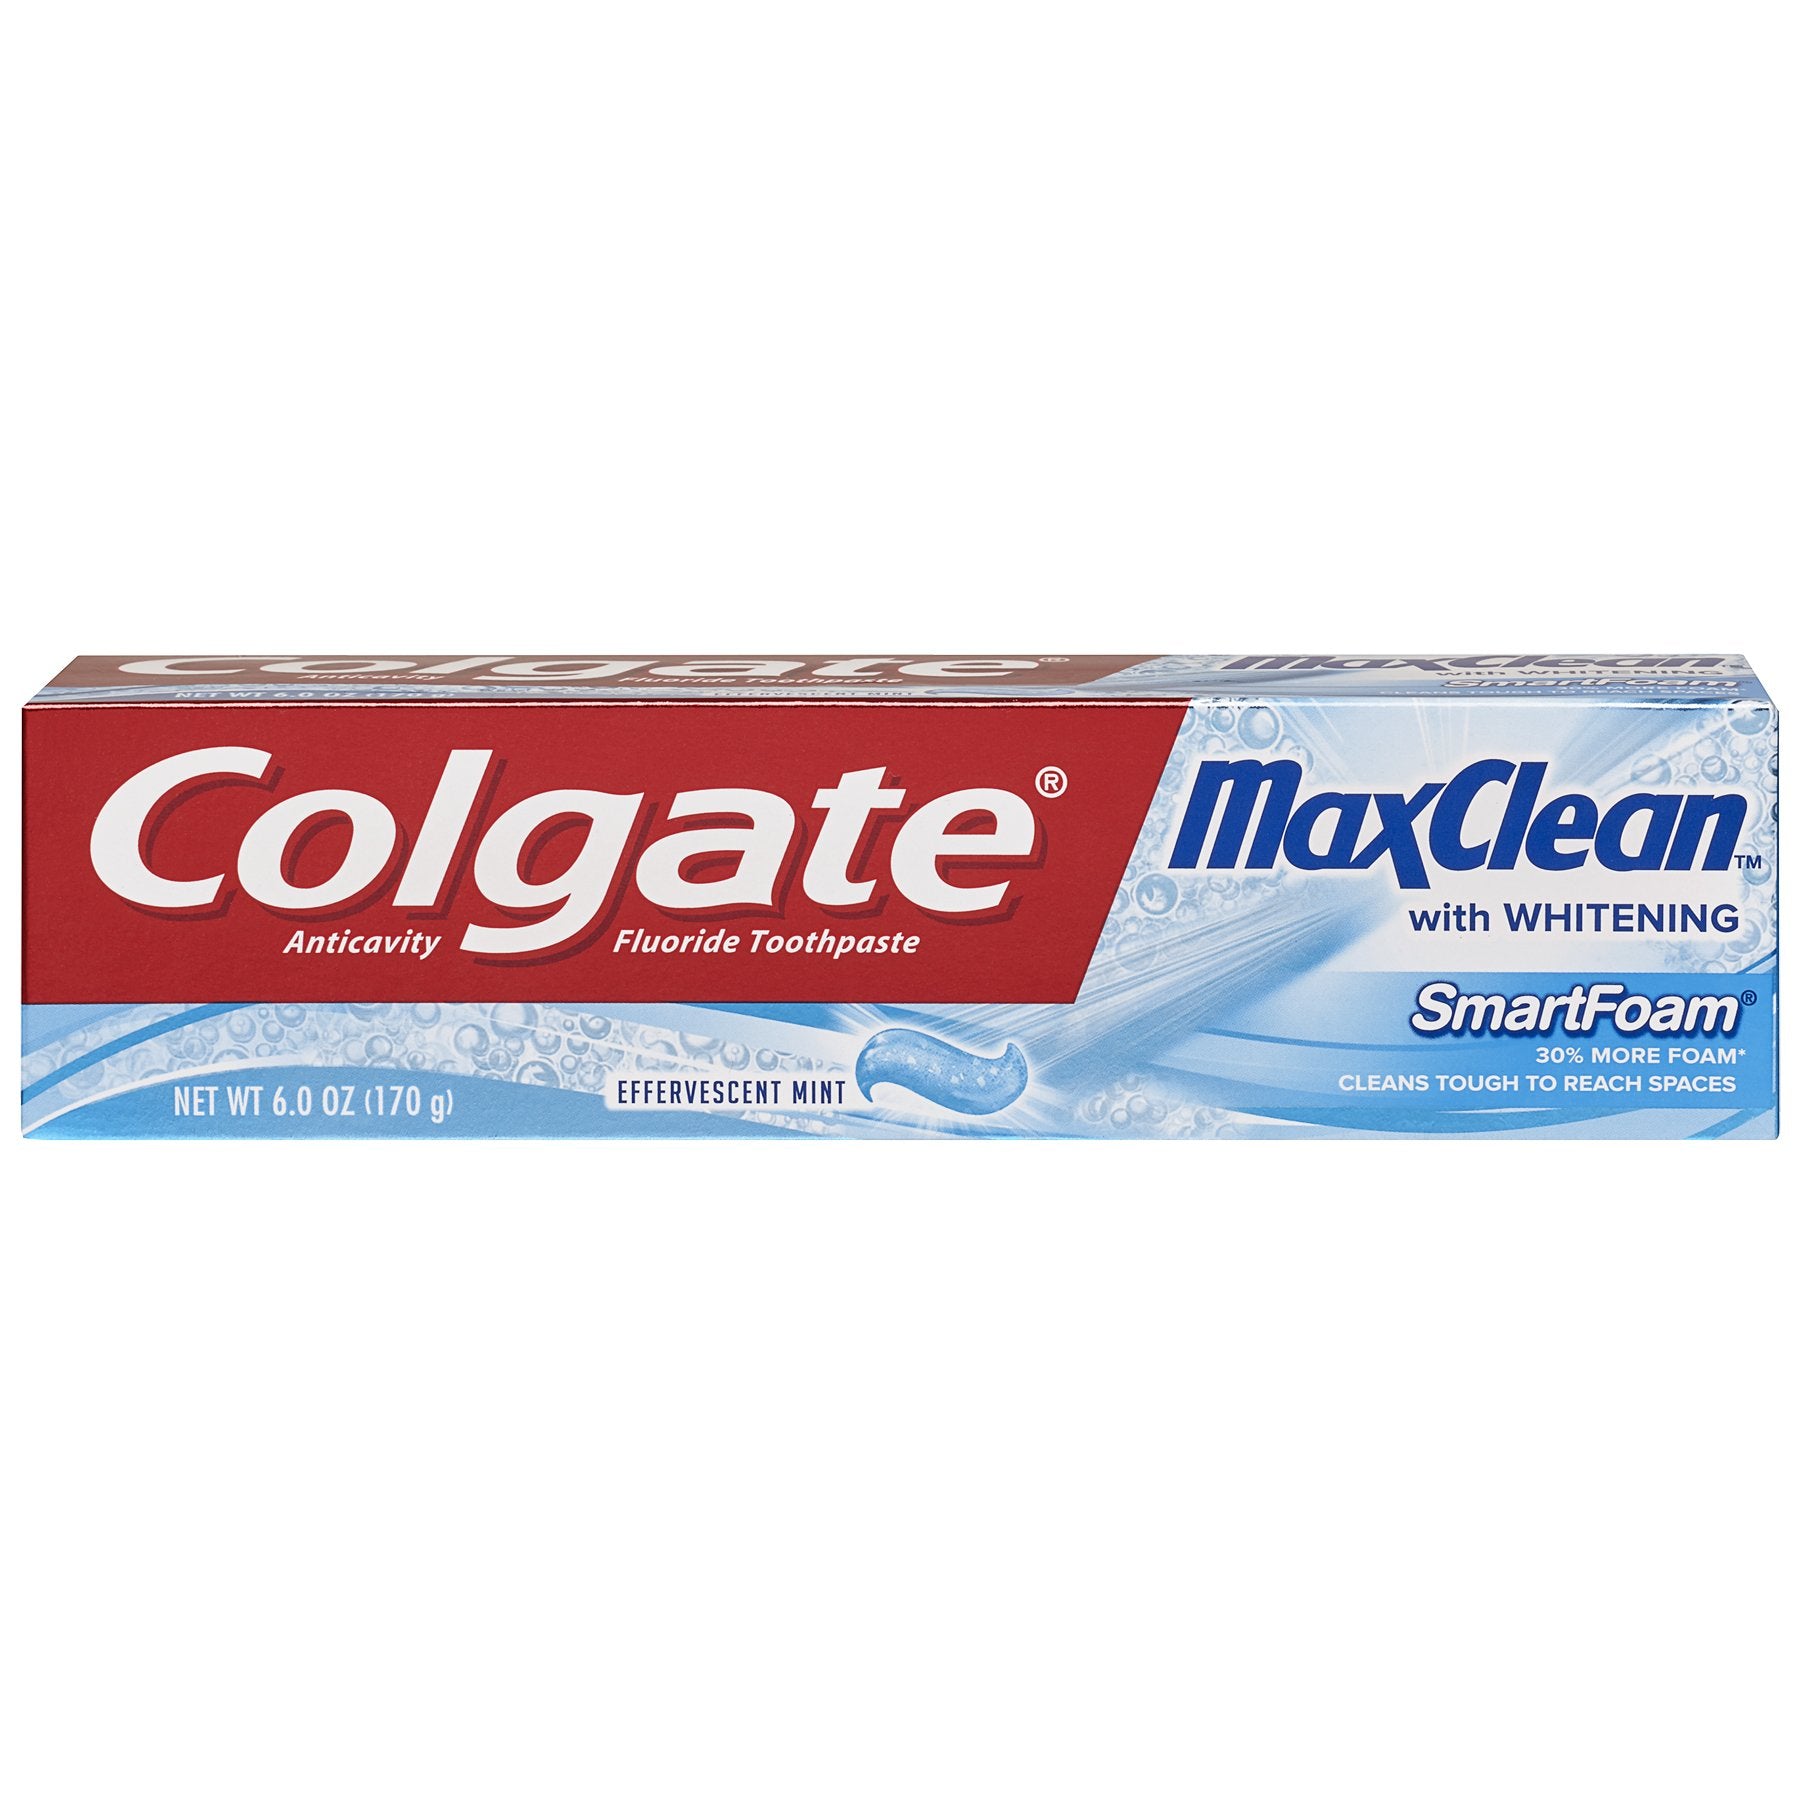 Colgate MaxClean SmartFoam with Whitening Toothpaste, Effervescent Mint 6 oz (Pack of 2)